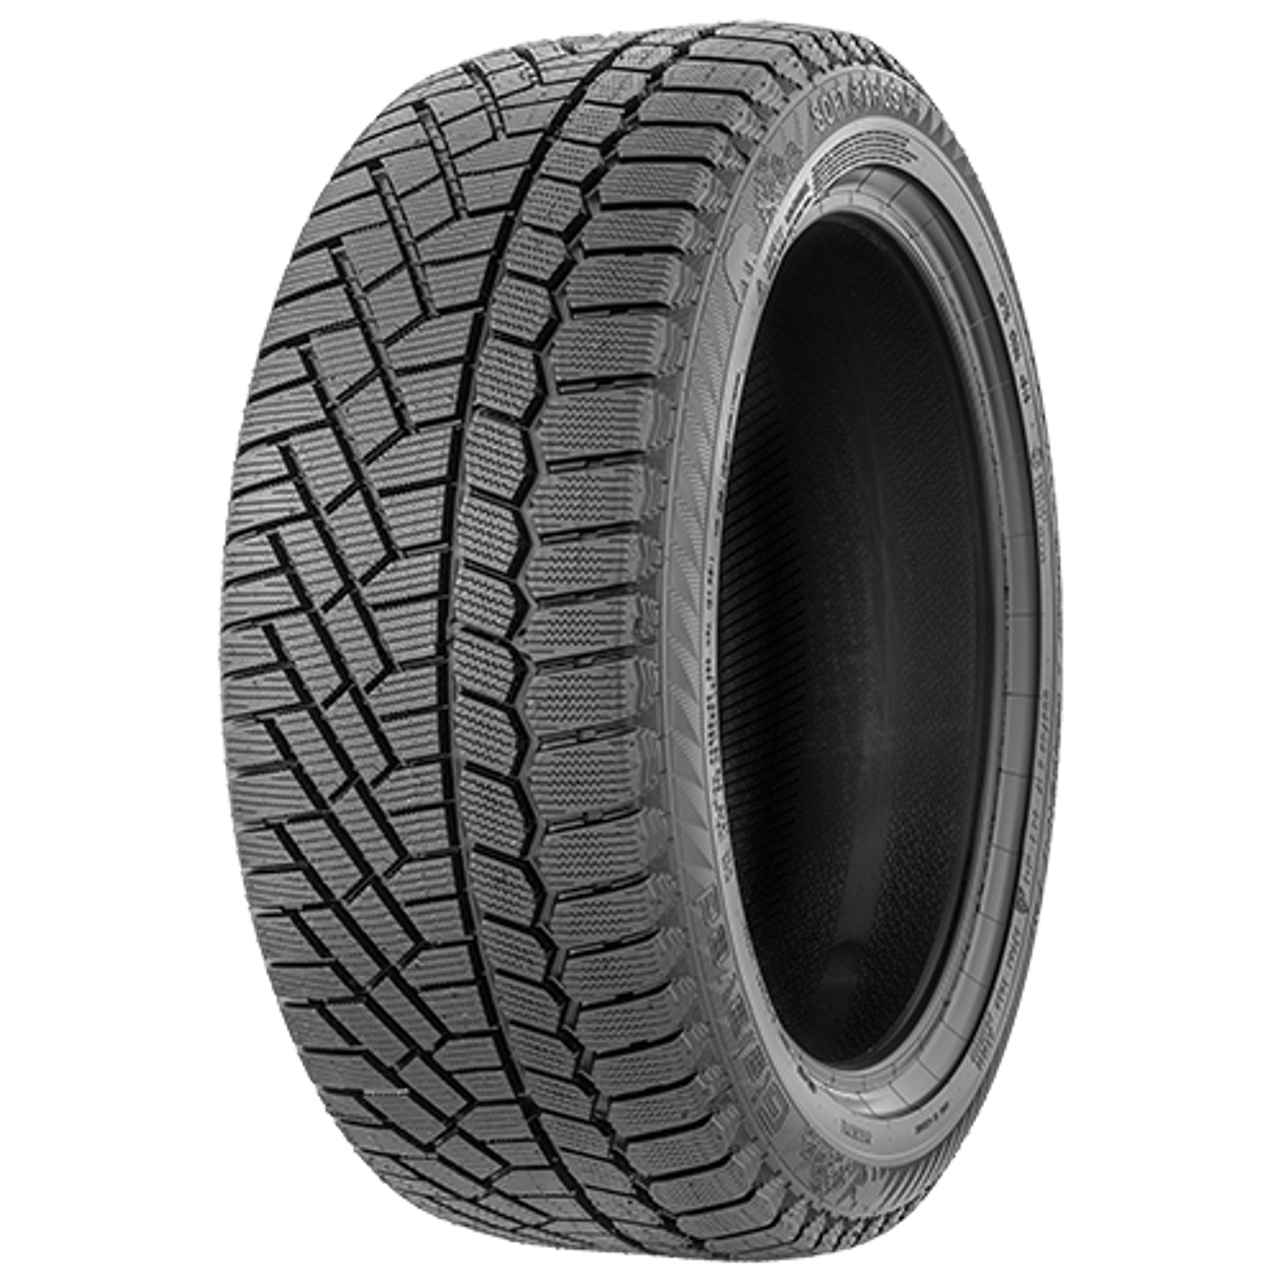 GISLAVED SOFT*FROST 200 235/65R17 108T NORDIC COMPOUND BSW XL